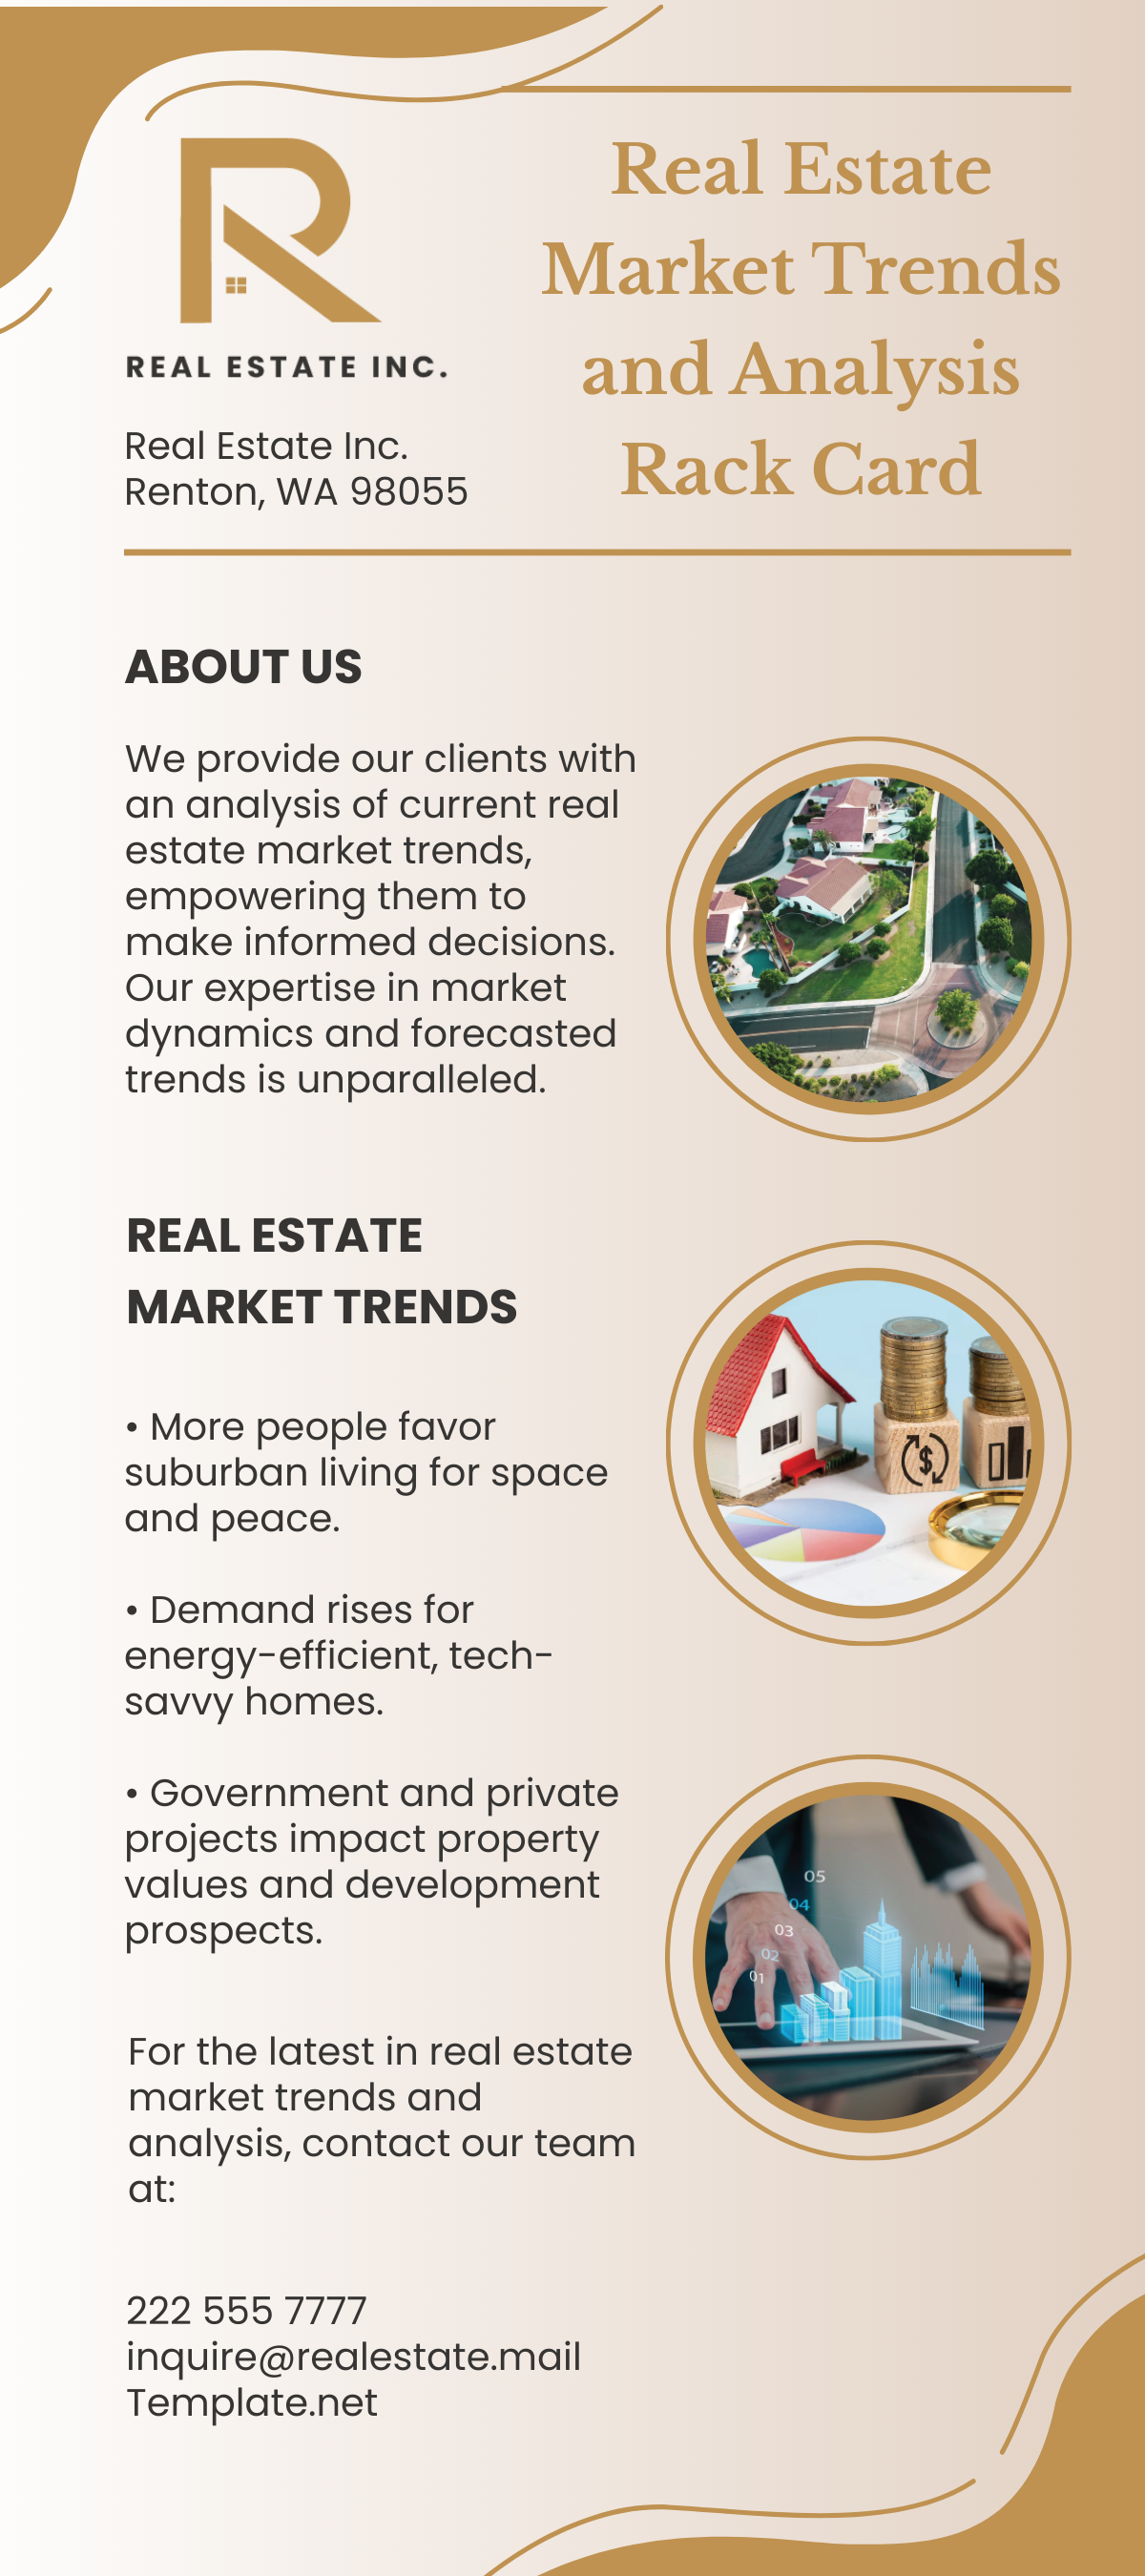 Real Estate Market Trends and Analysis Rack Card